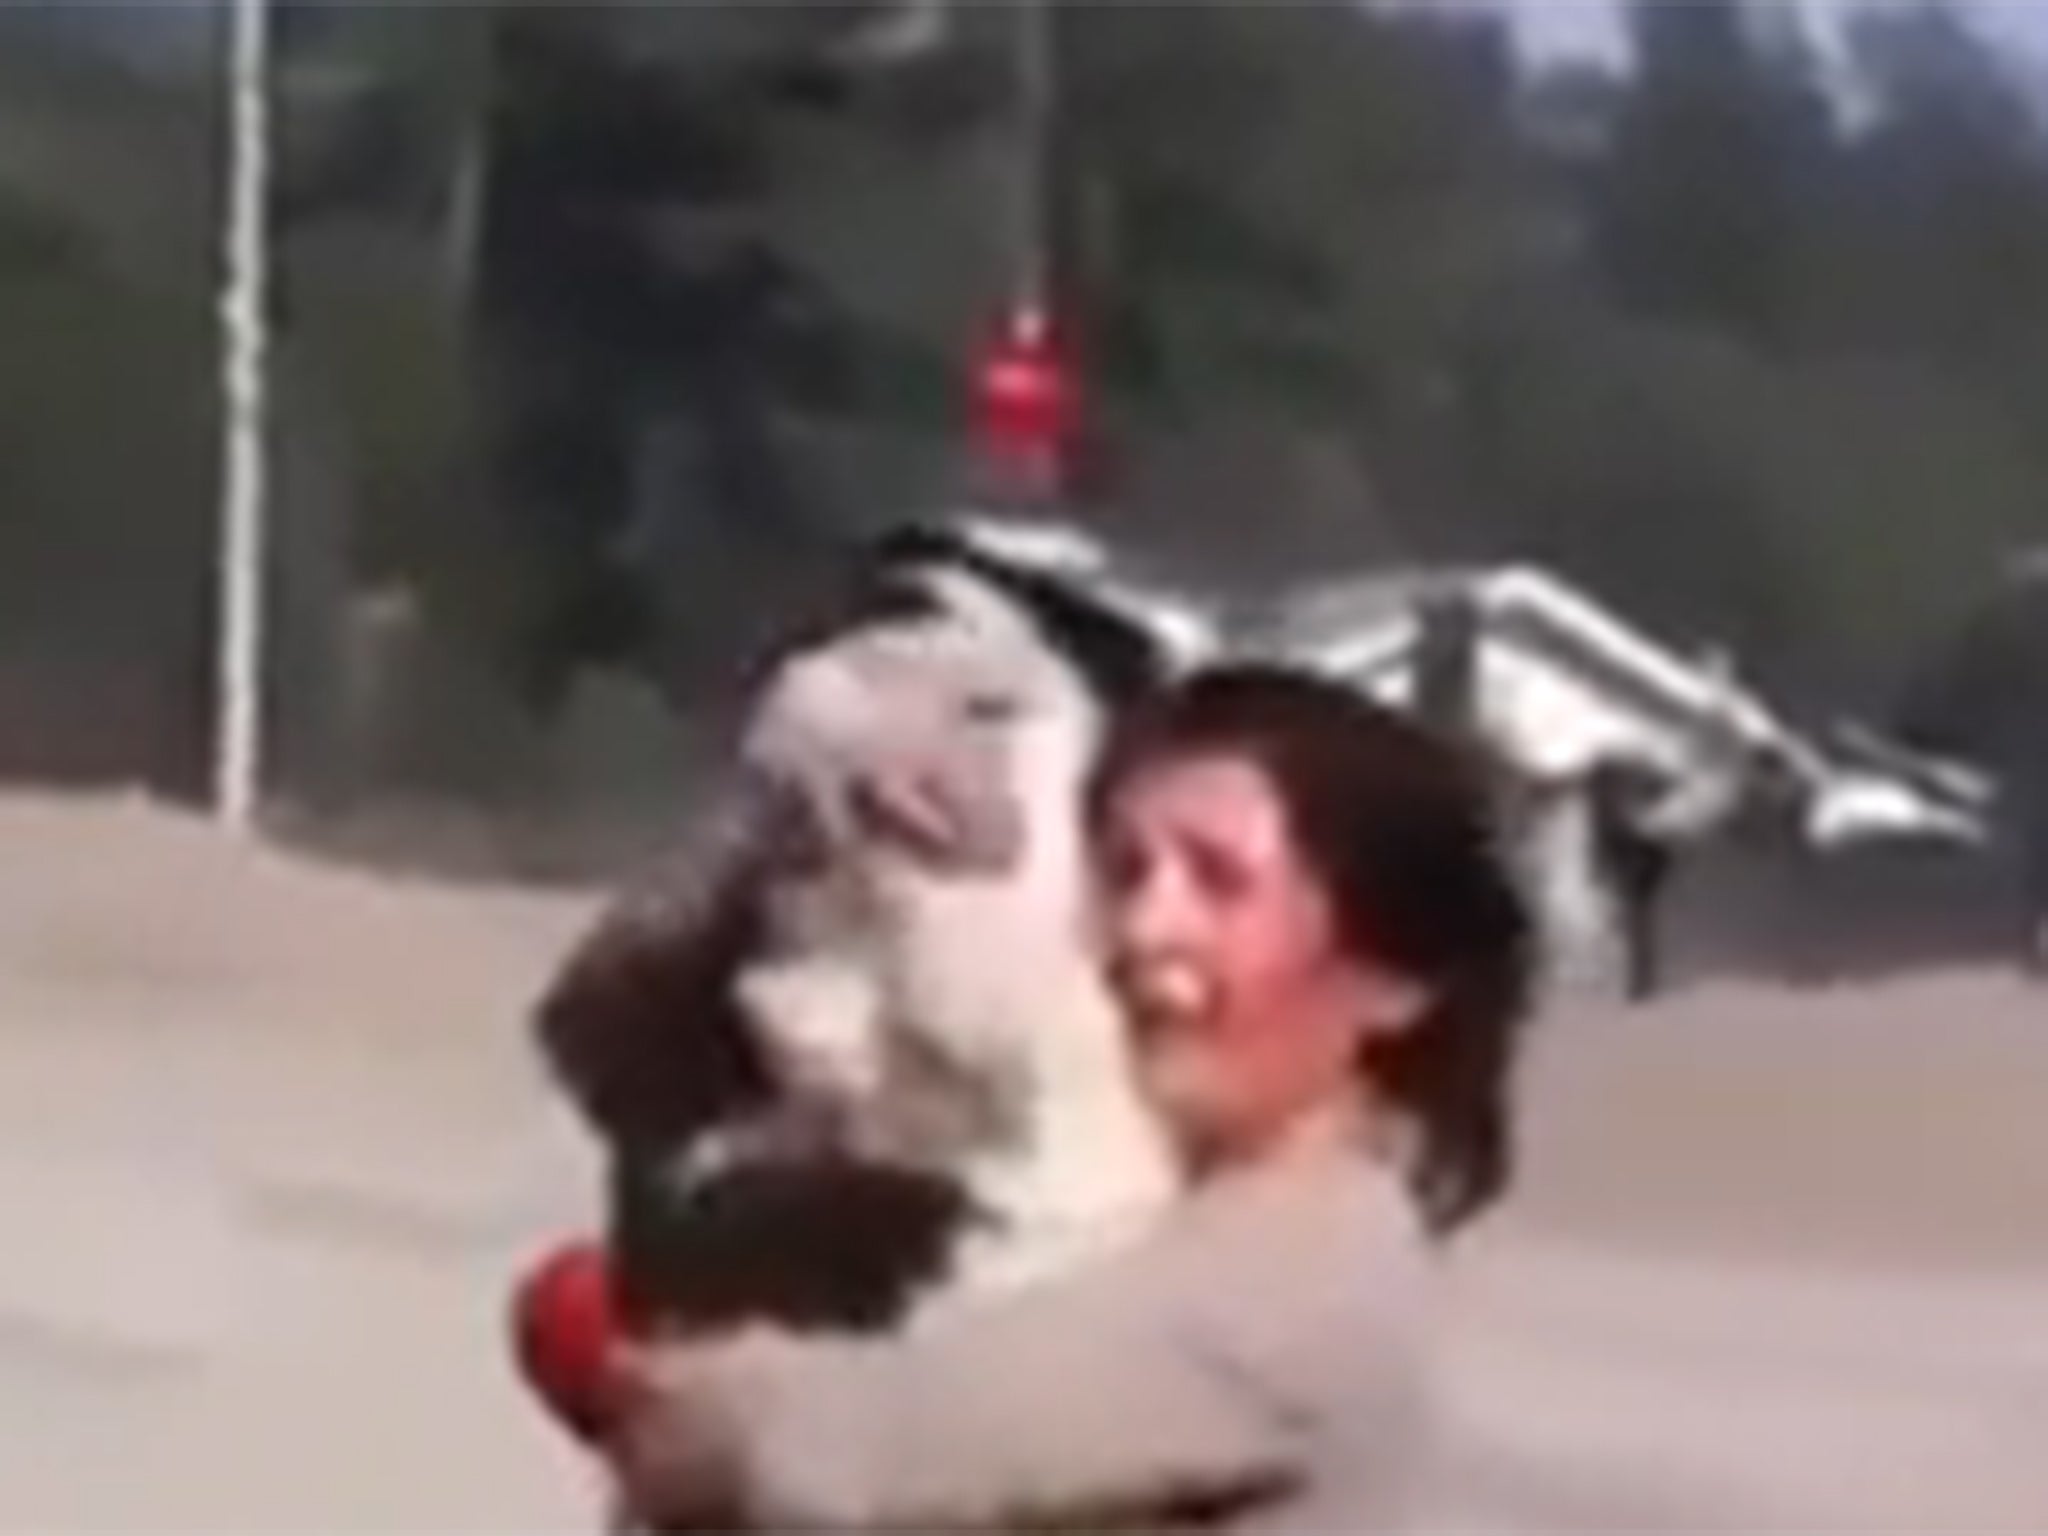 The woman finds her beloved dog